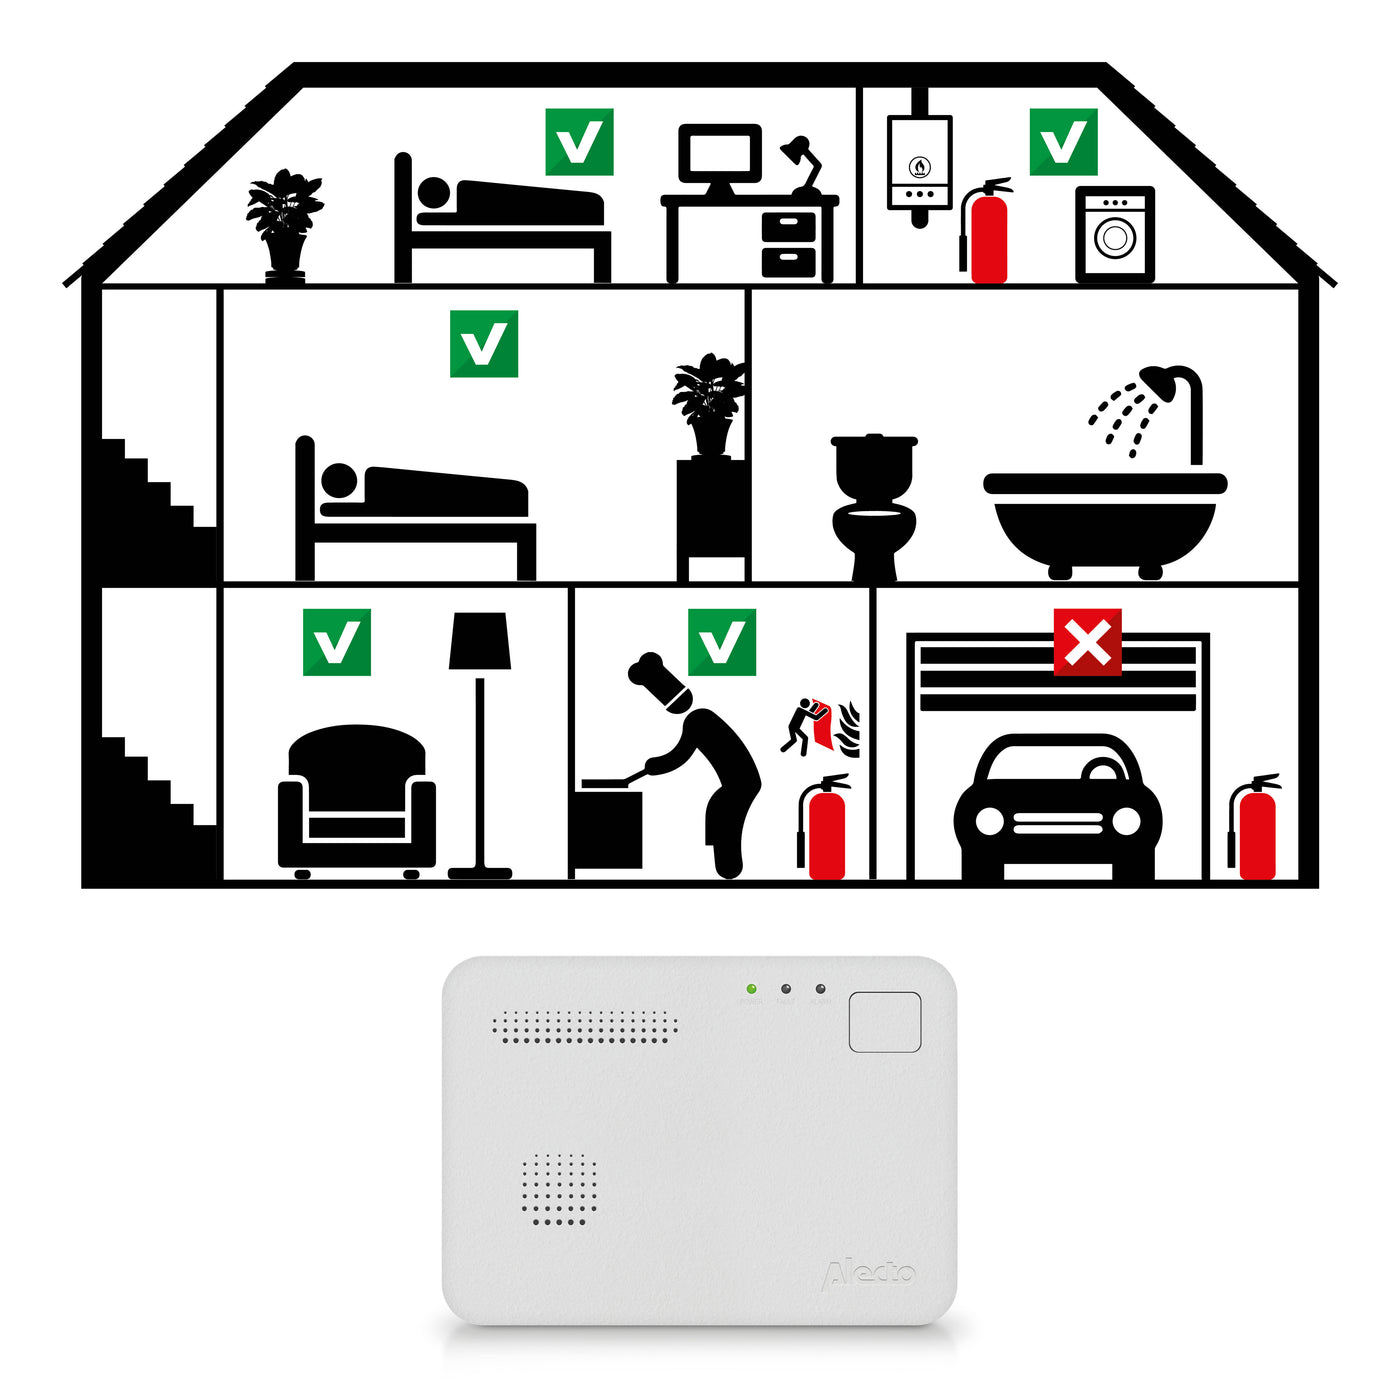 Alecto BPB19 - Fire safety kit with 2 mini smoke detectors, 1 carbon monoxide alarm and 3 magnetic mounting plates